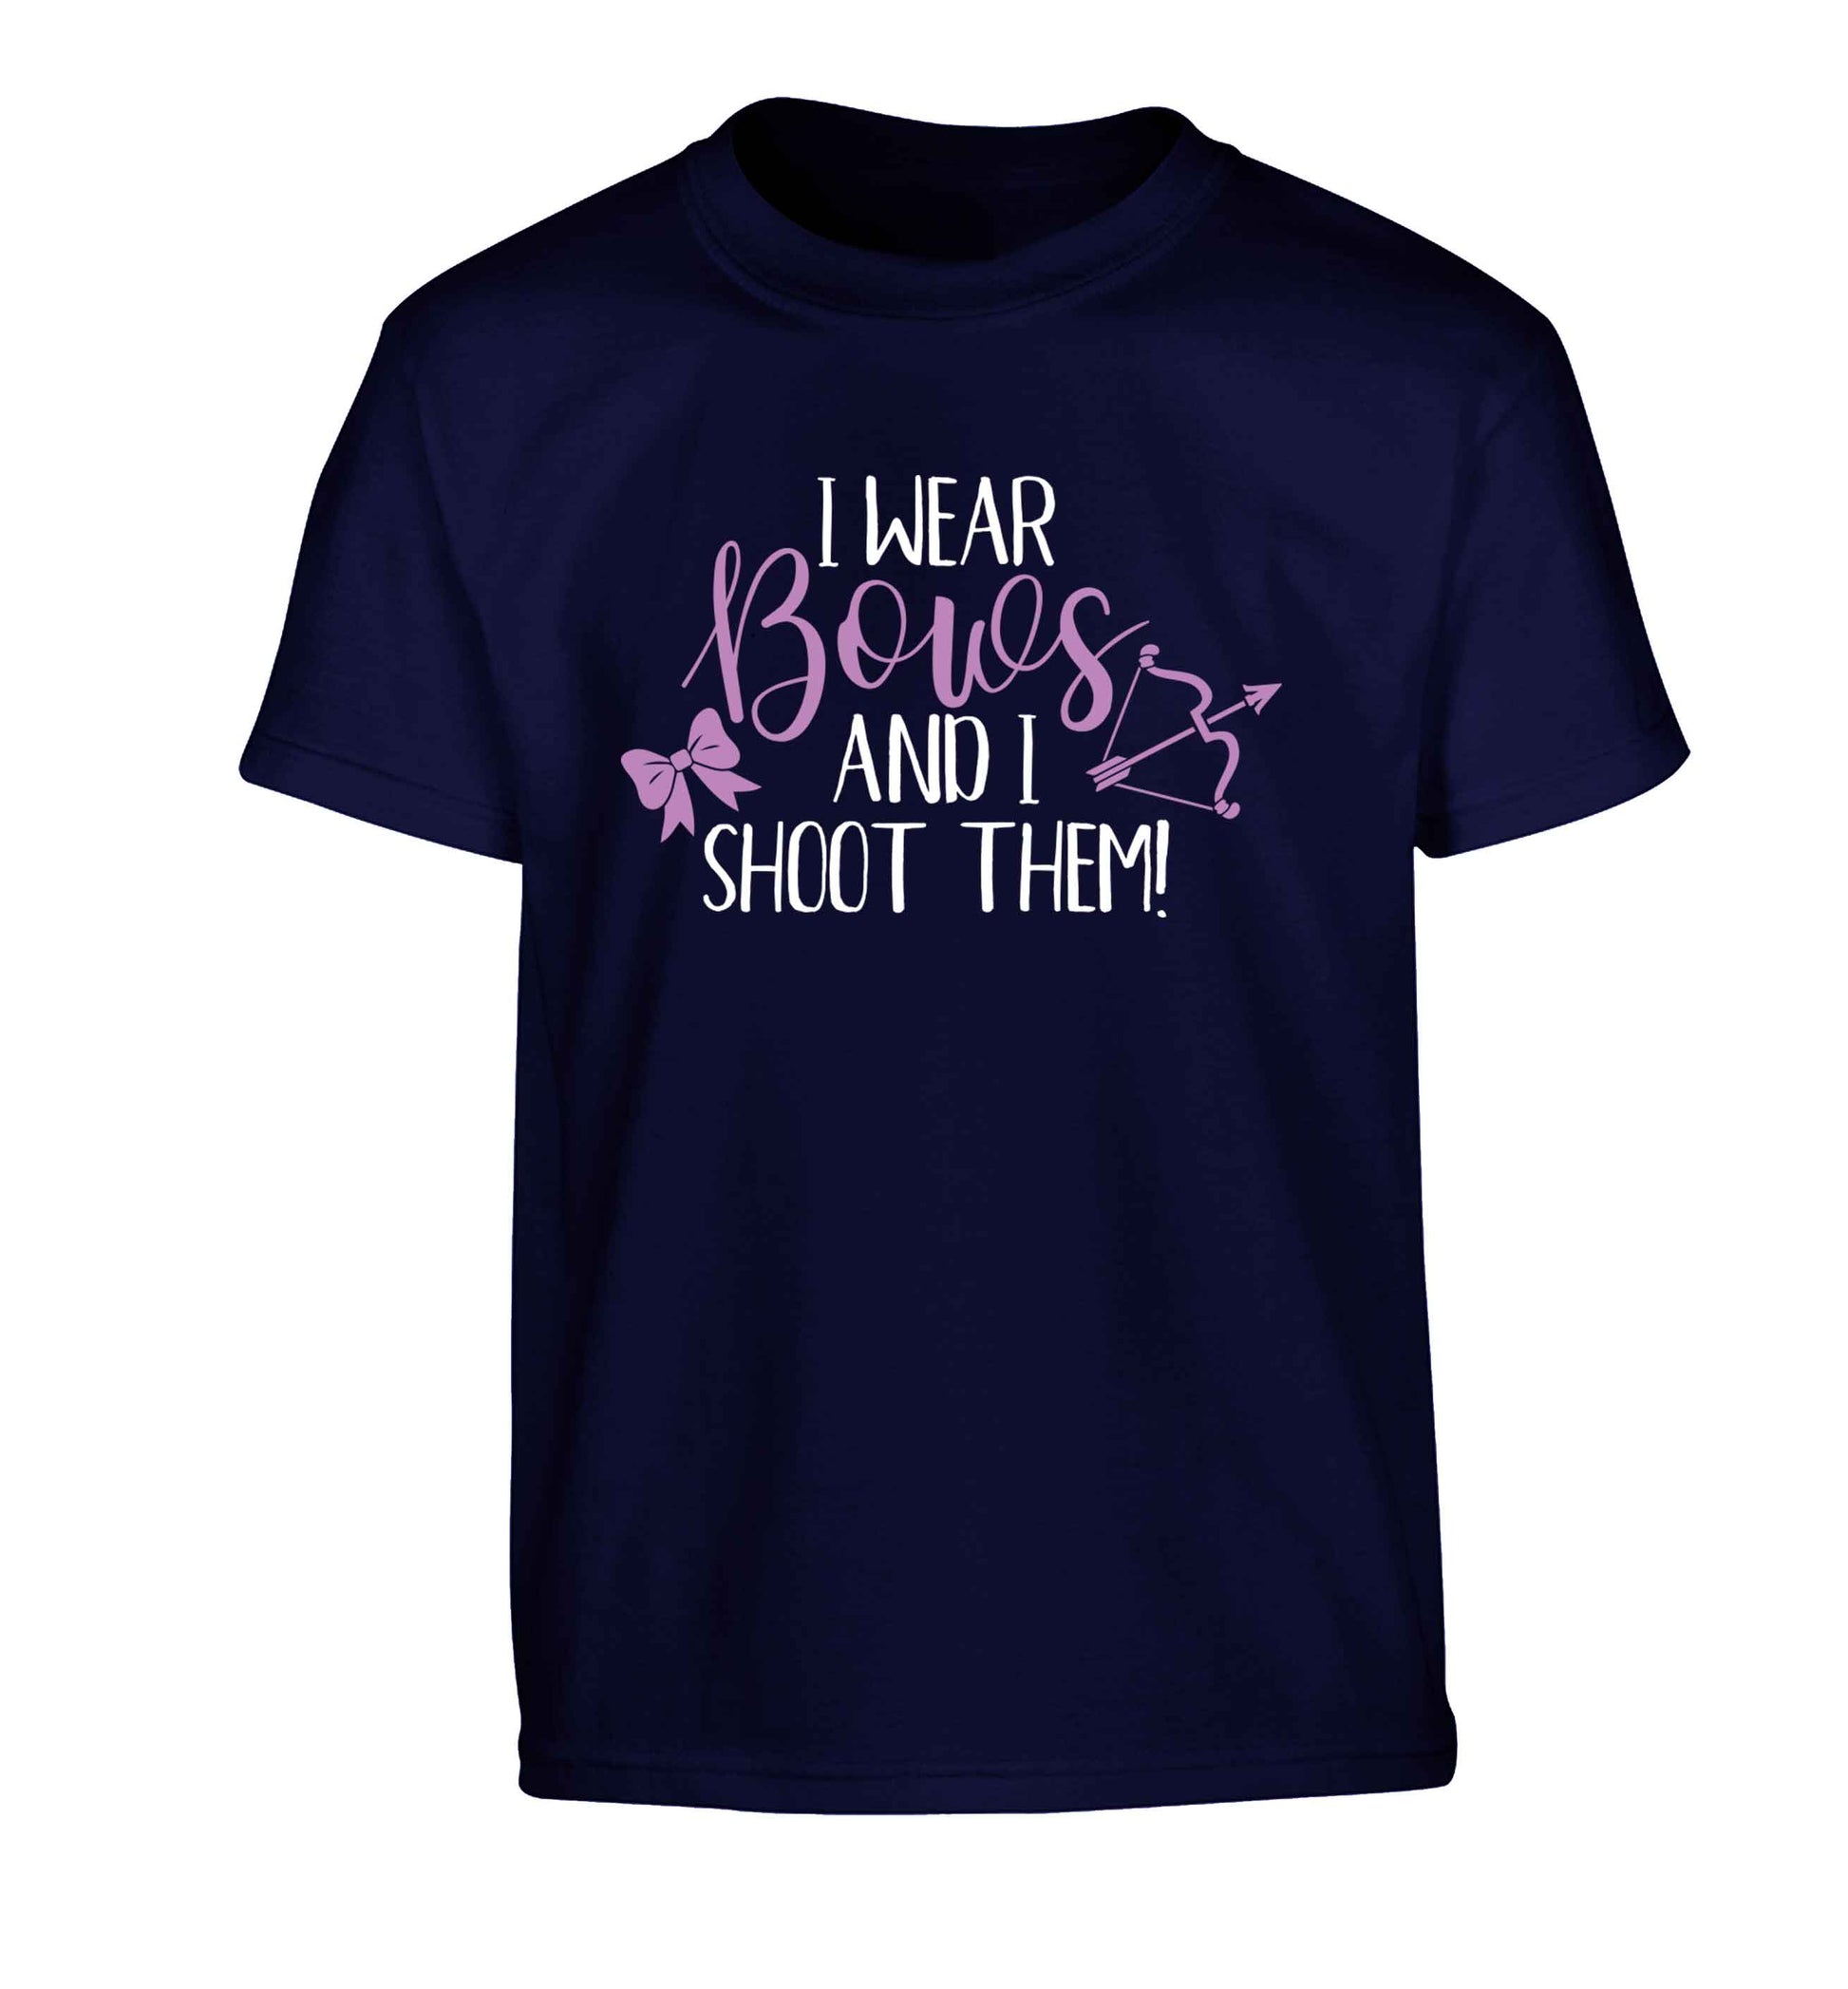 I wear bows and I shoot them Children's navy Tshirt 12-13 Years